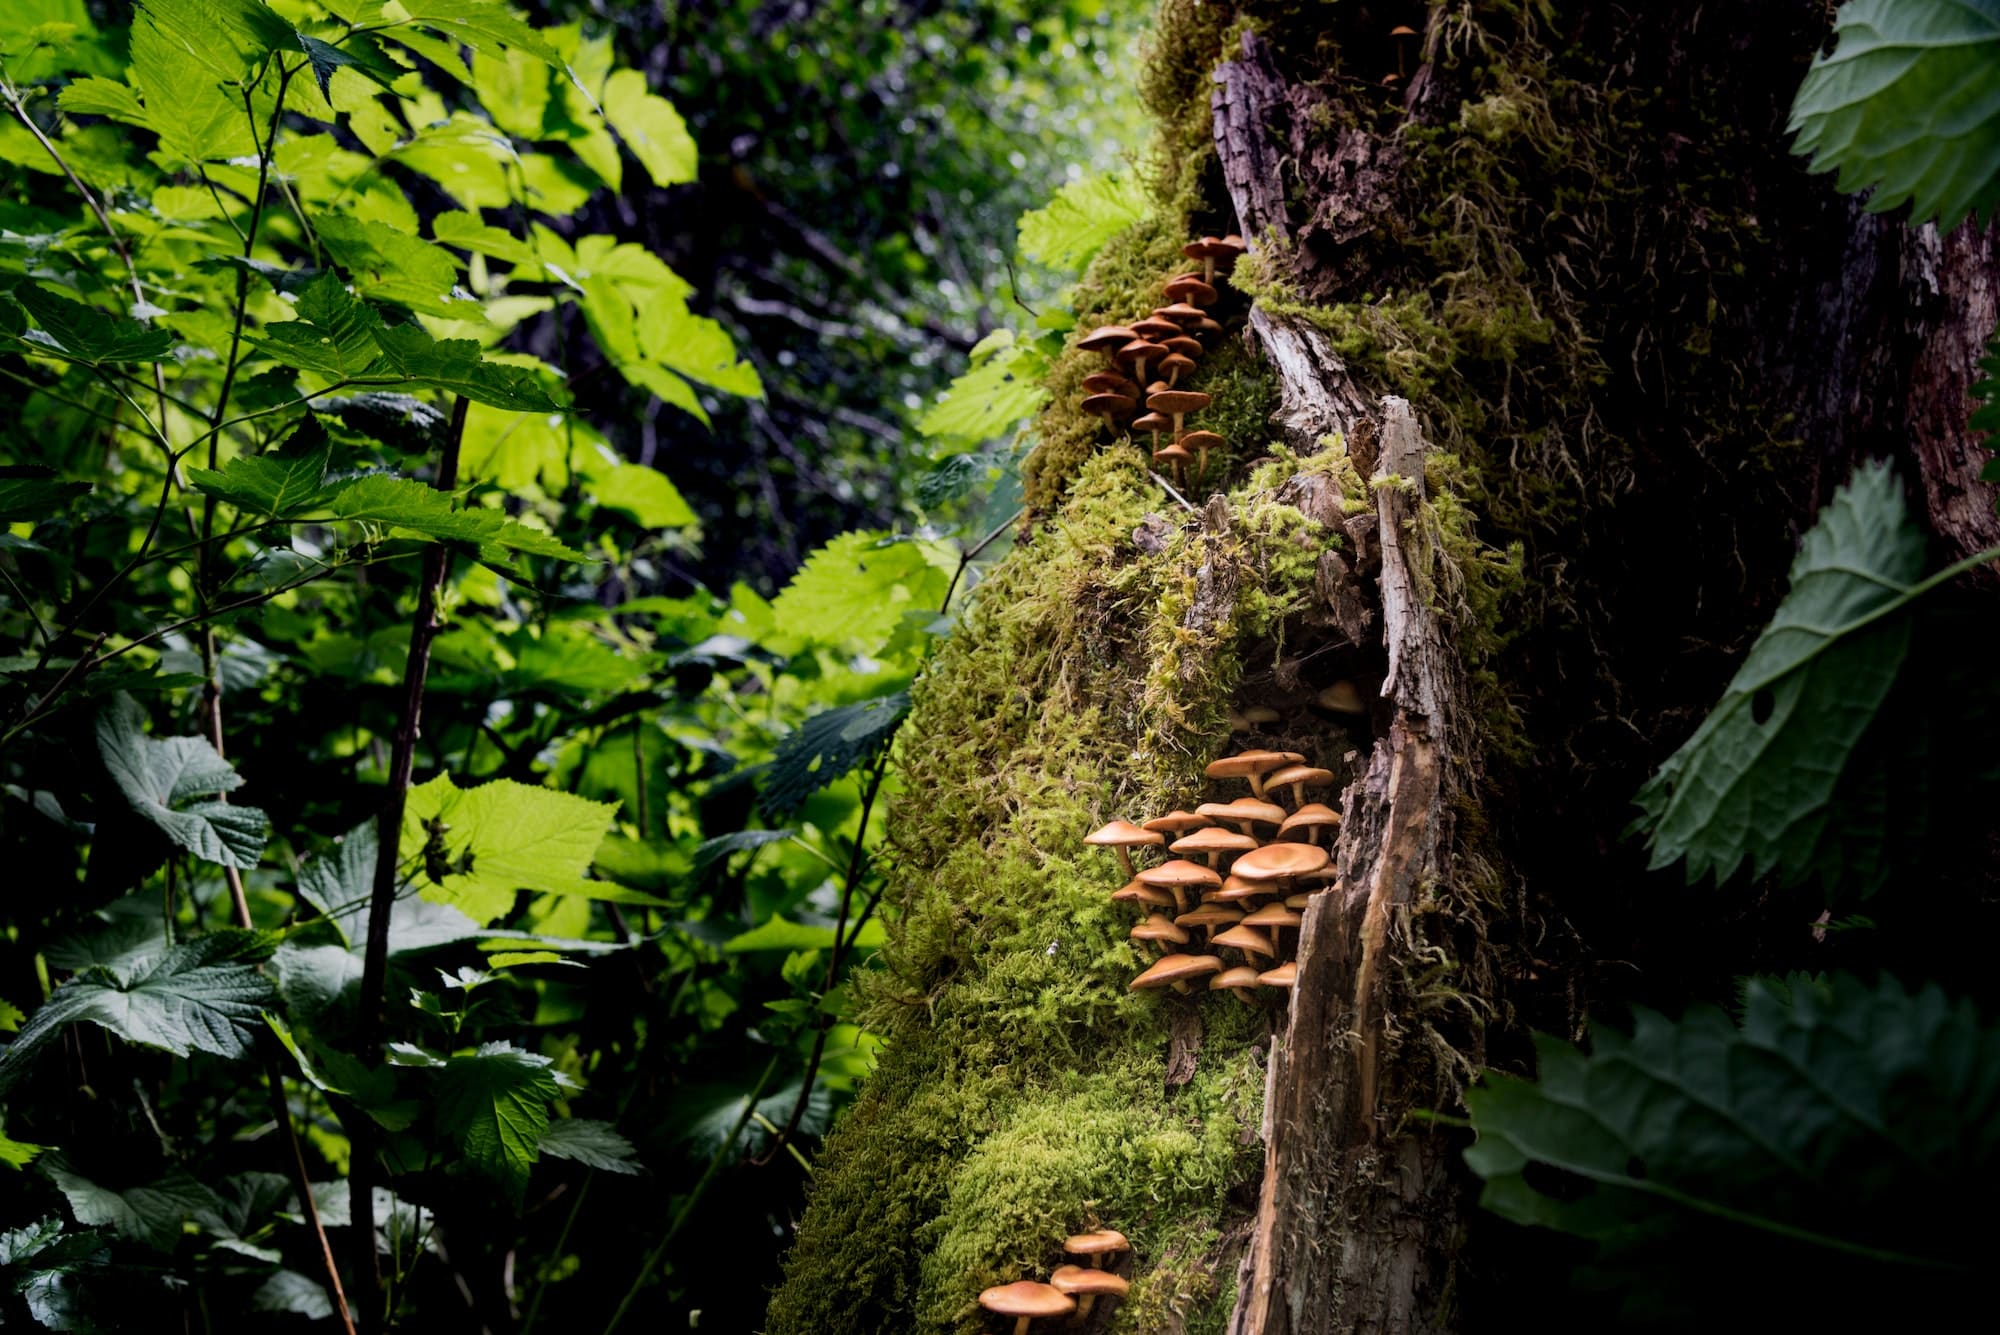 Wild mushroom colony growing in a Pacific Northwest rainforest. RLTheis